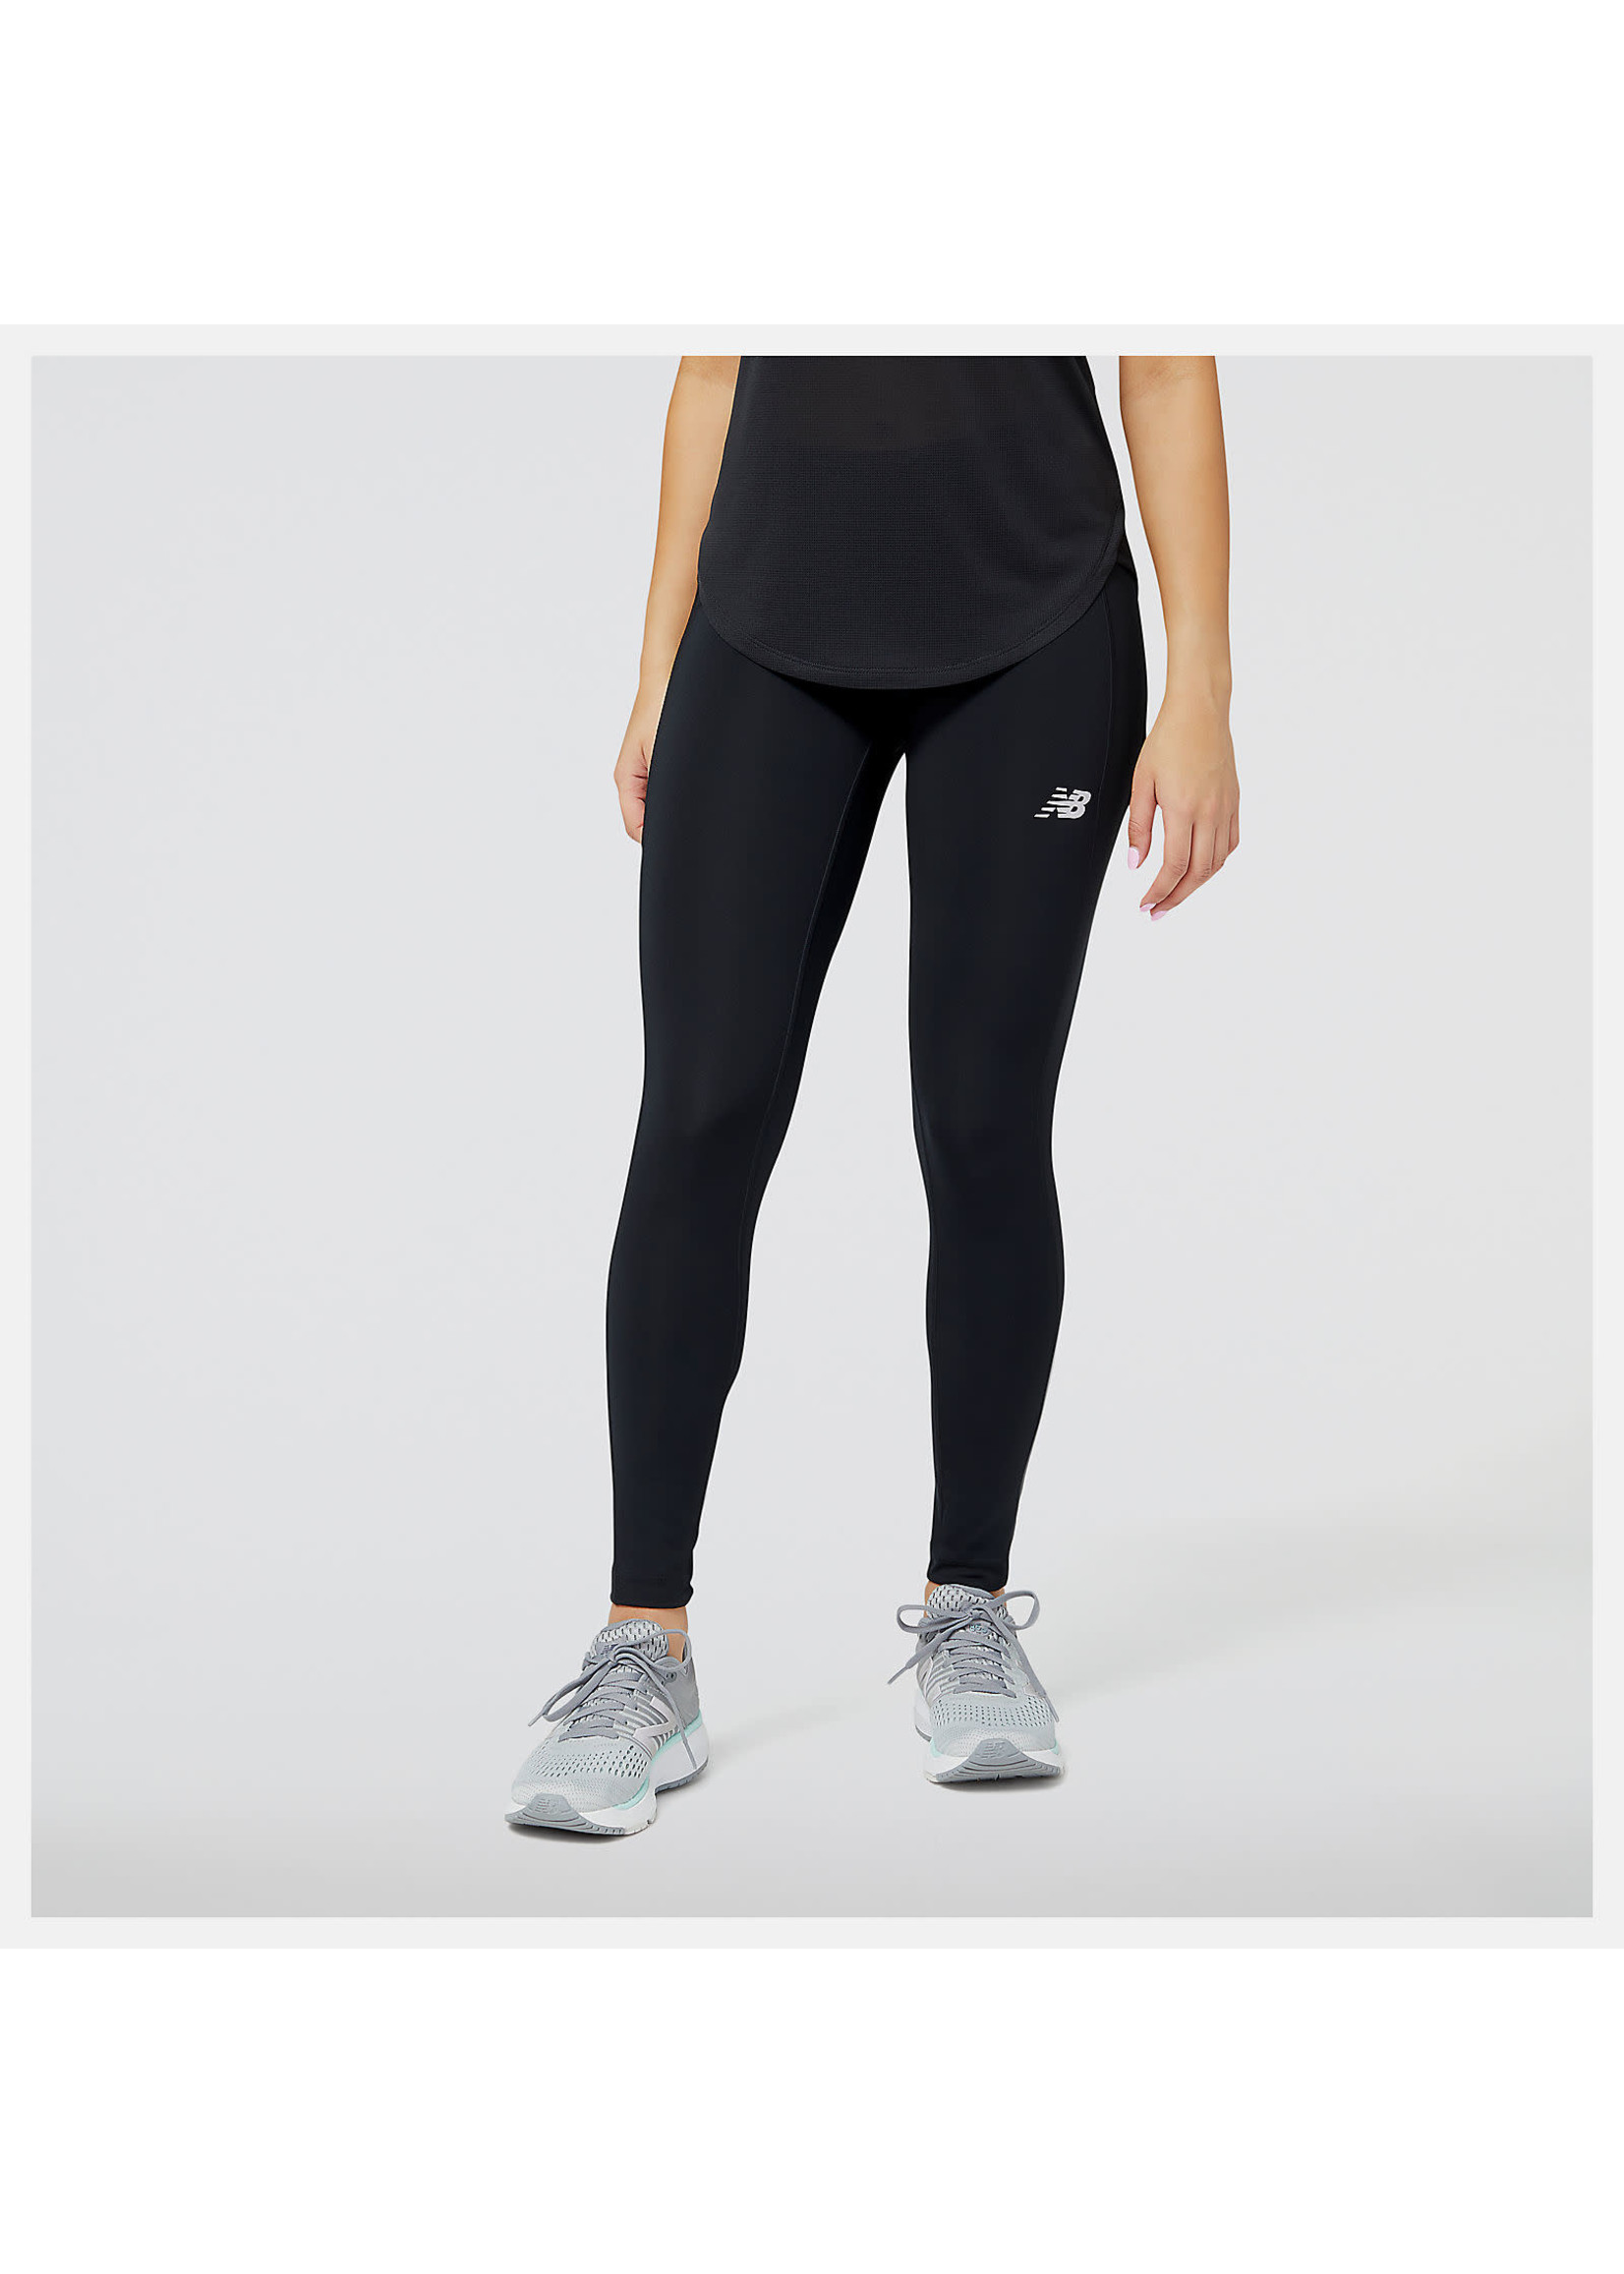 New Balance Womens Reflective Print Accelerate Tight - Sport from   UK